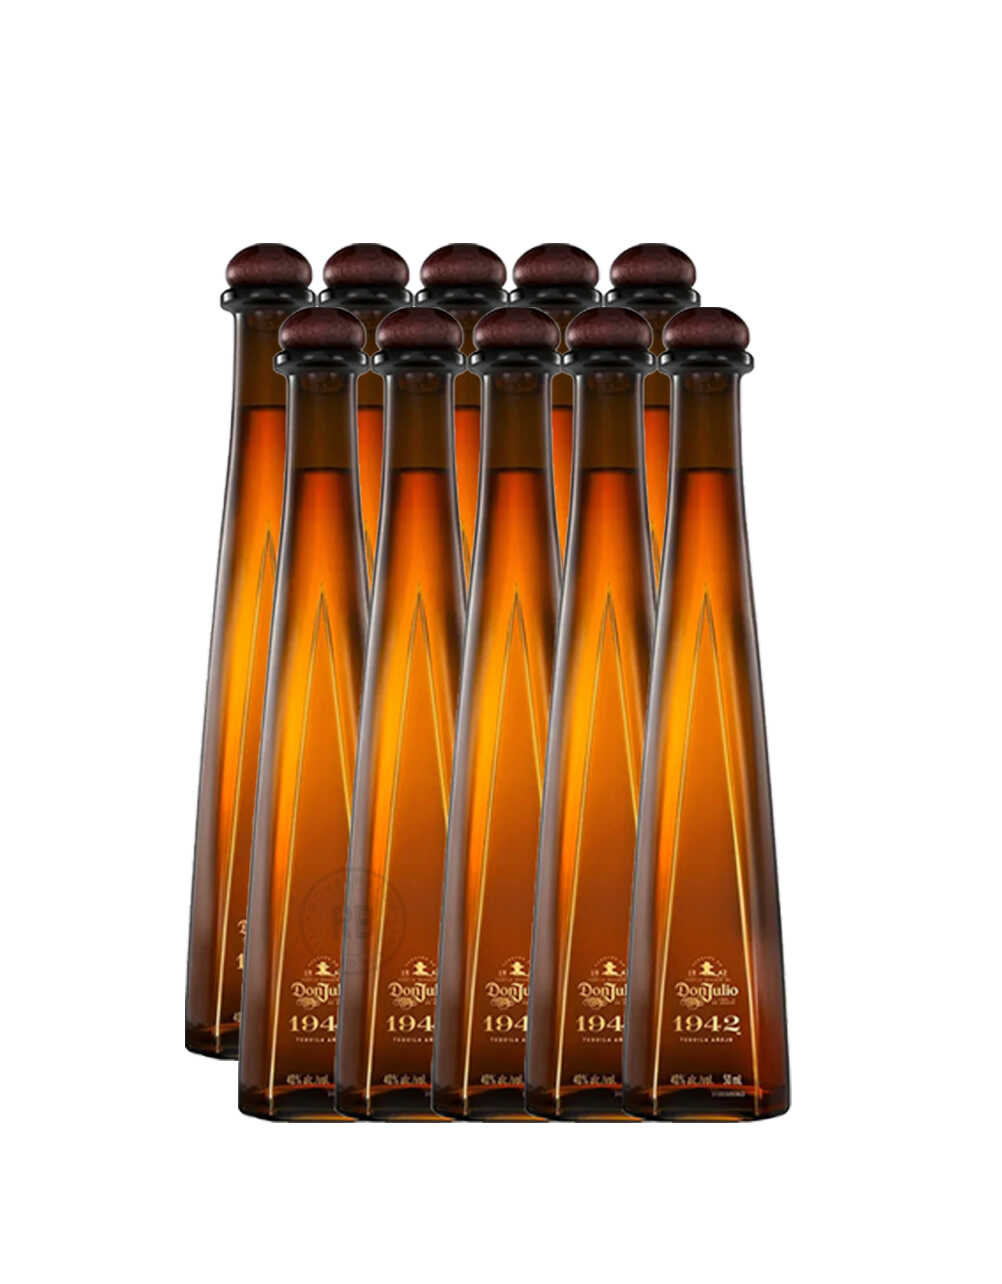 Don Julio 1942 Anejo Tequila (10 Pack) x 50ml